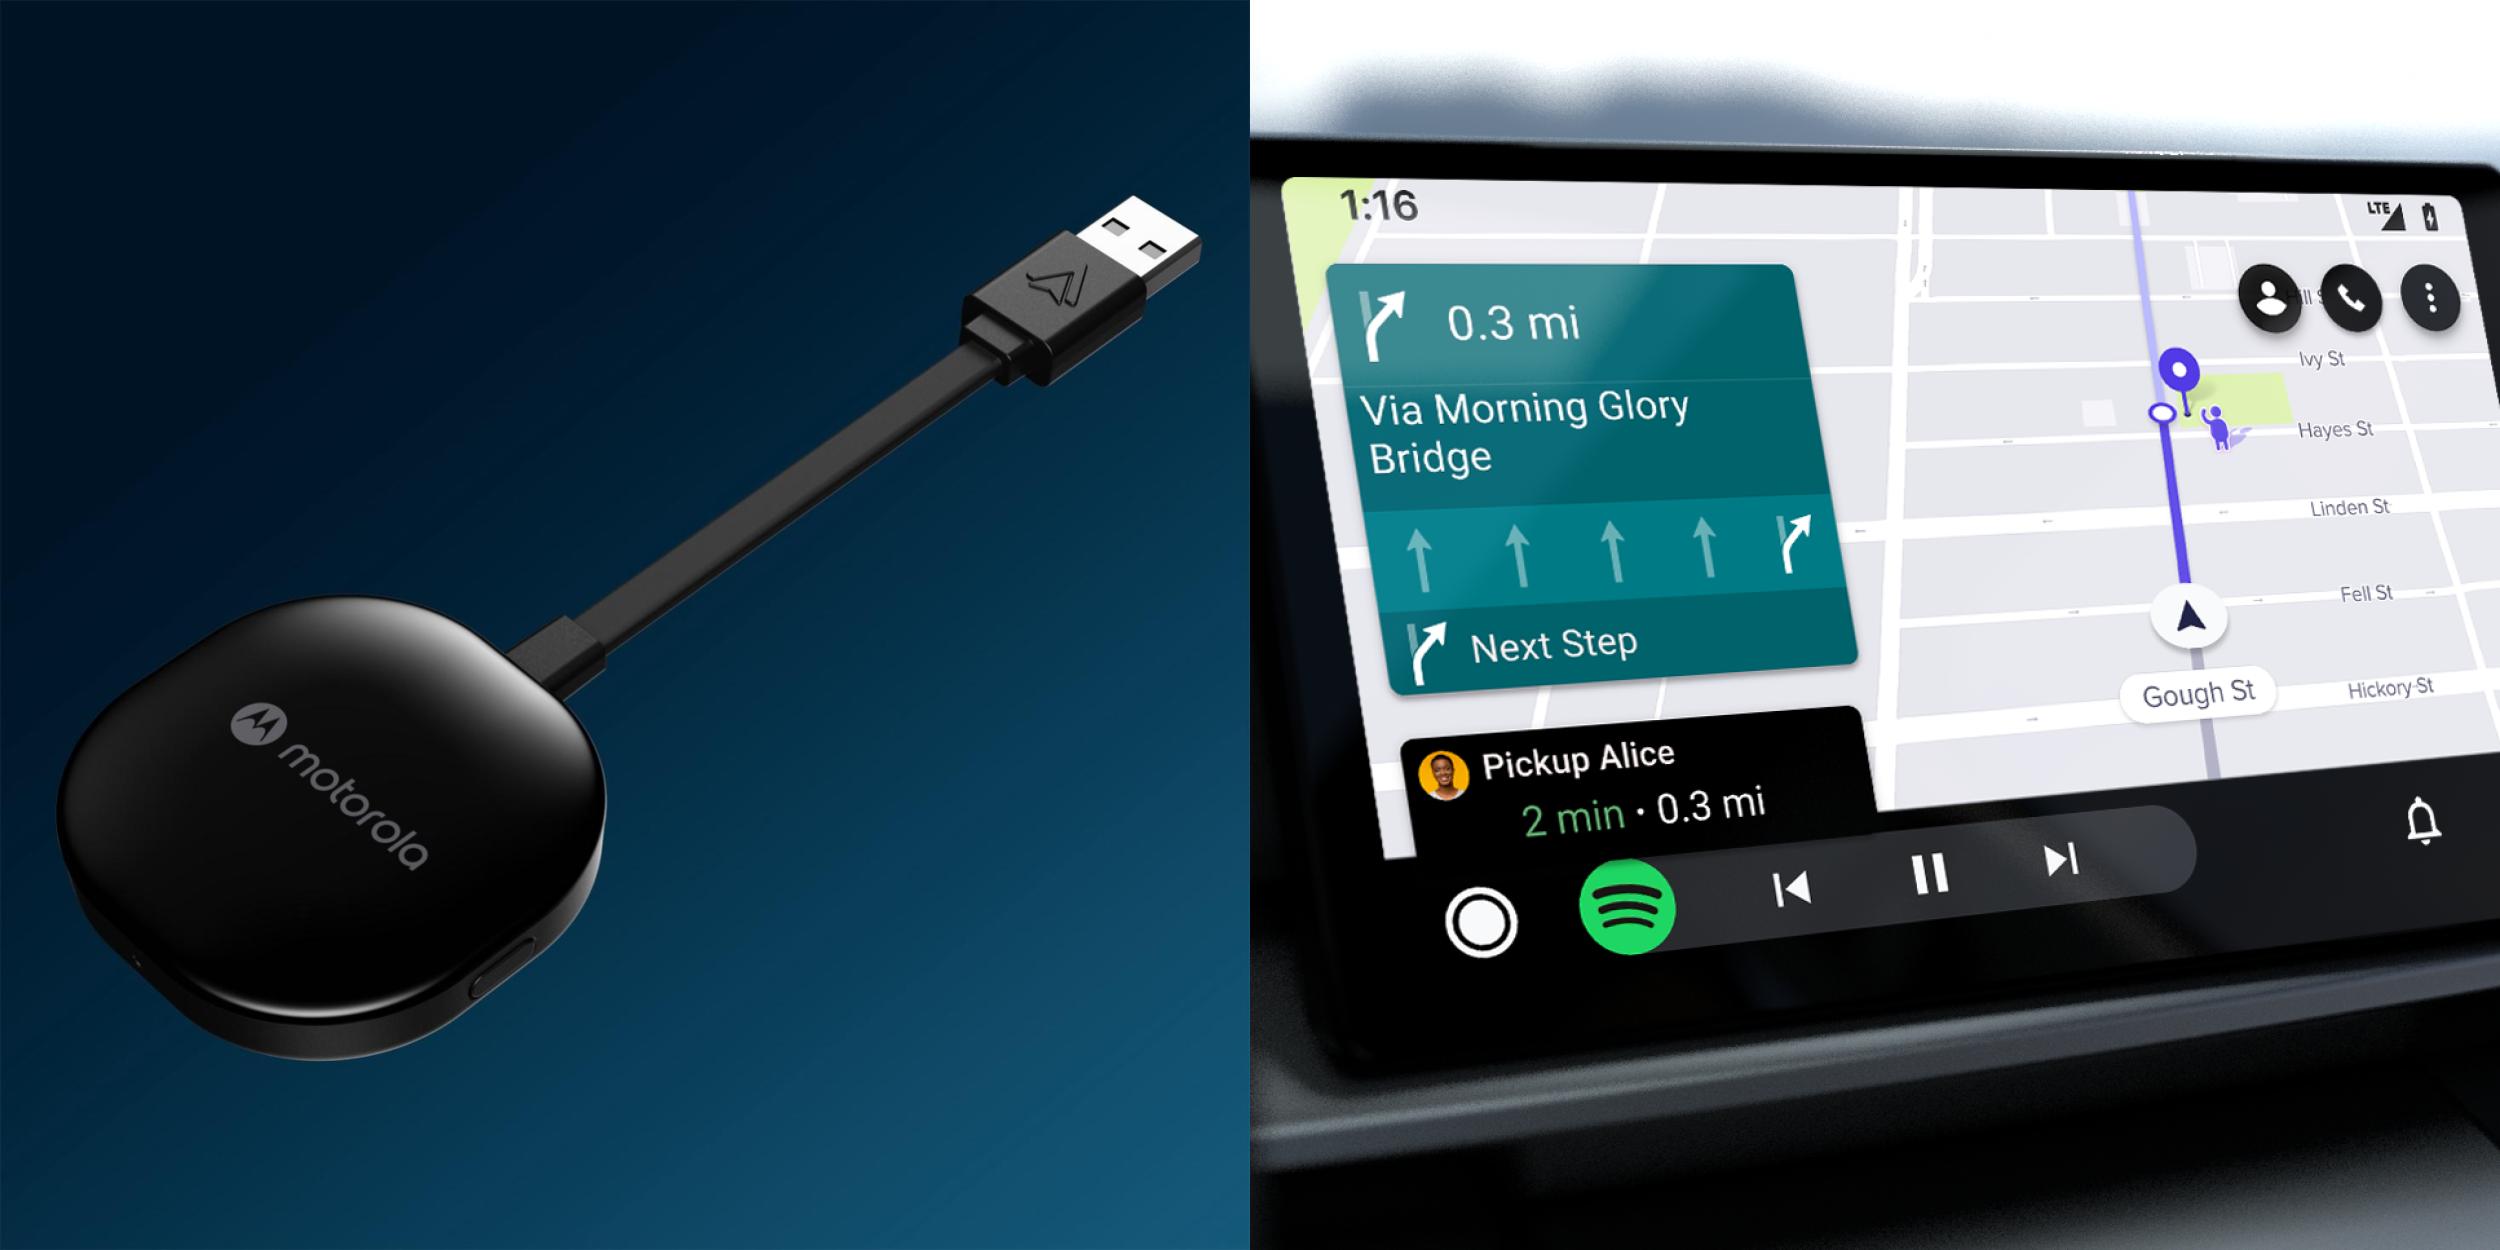 AA Wireless Android Auto Dongle available for $90 at  Store